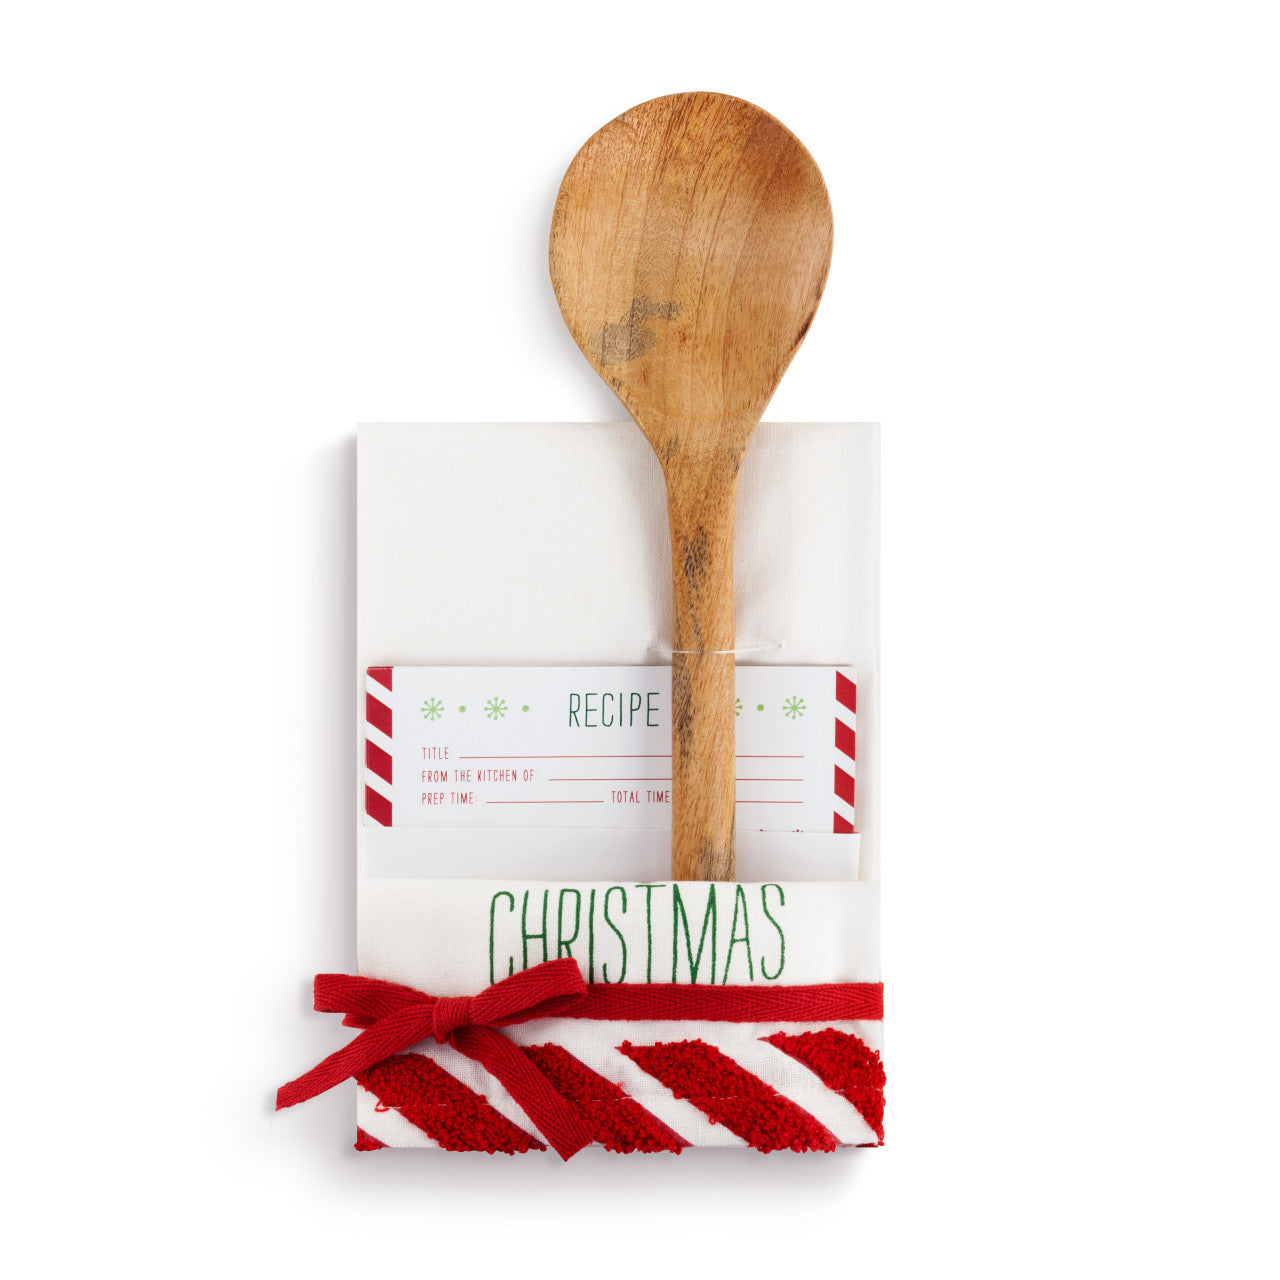 Merry Christmas Towel & Spoon With Recipe Card